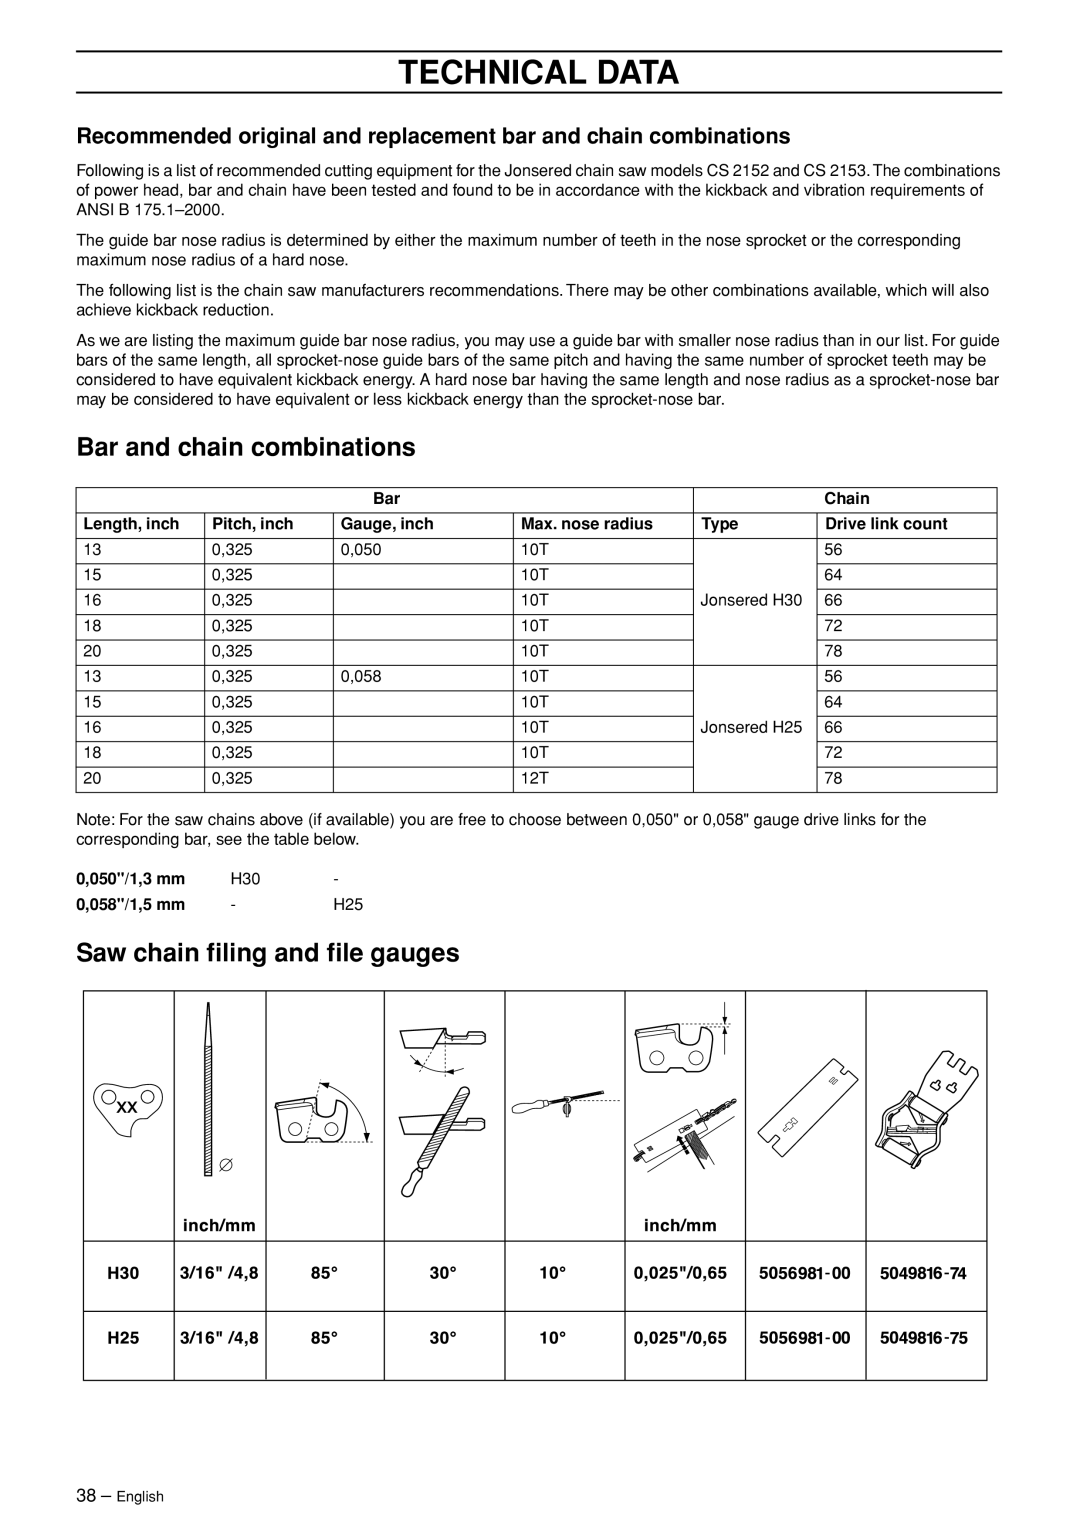 Jonsered CS 2153 manual Bar and chain combinations, Saw chain ﬁling and ﬁle gauges, Technical Data 